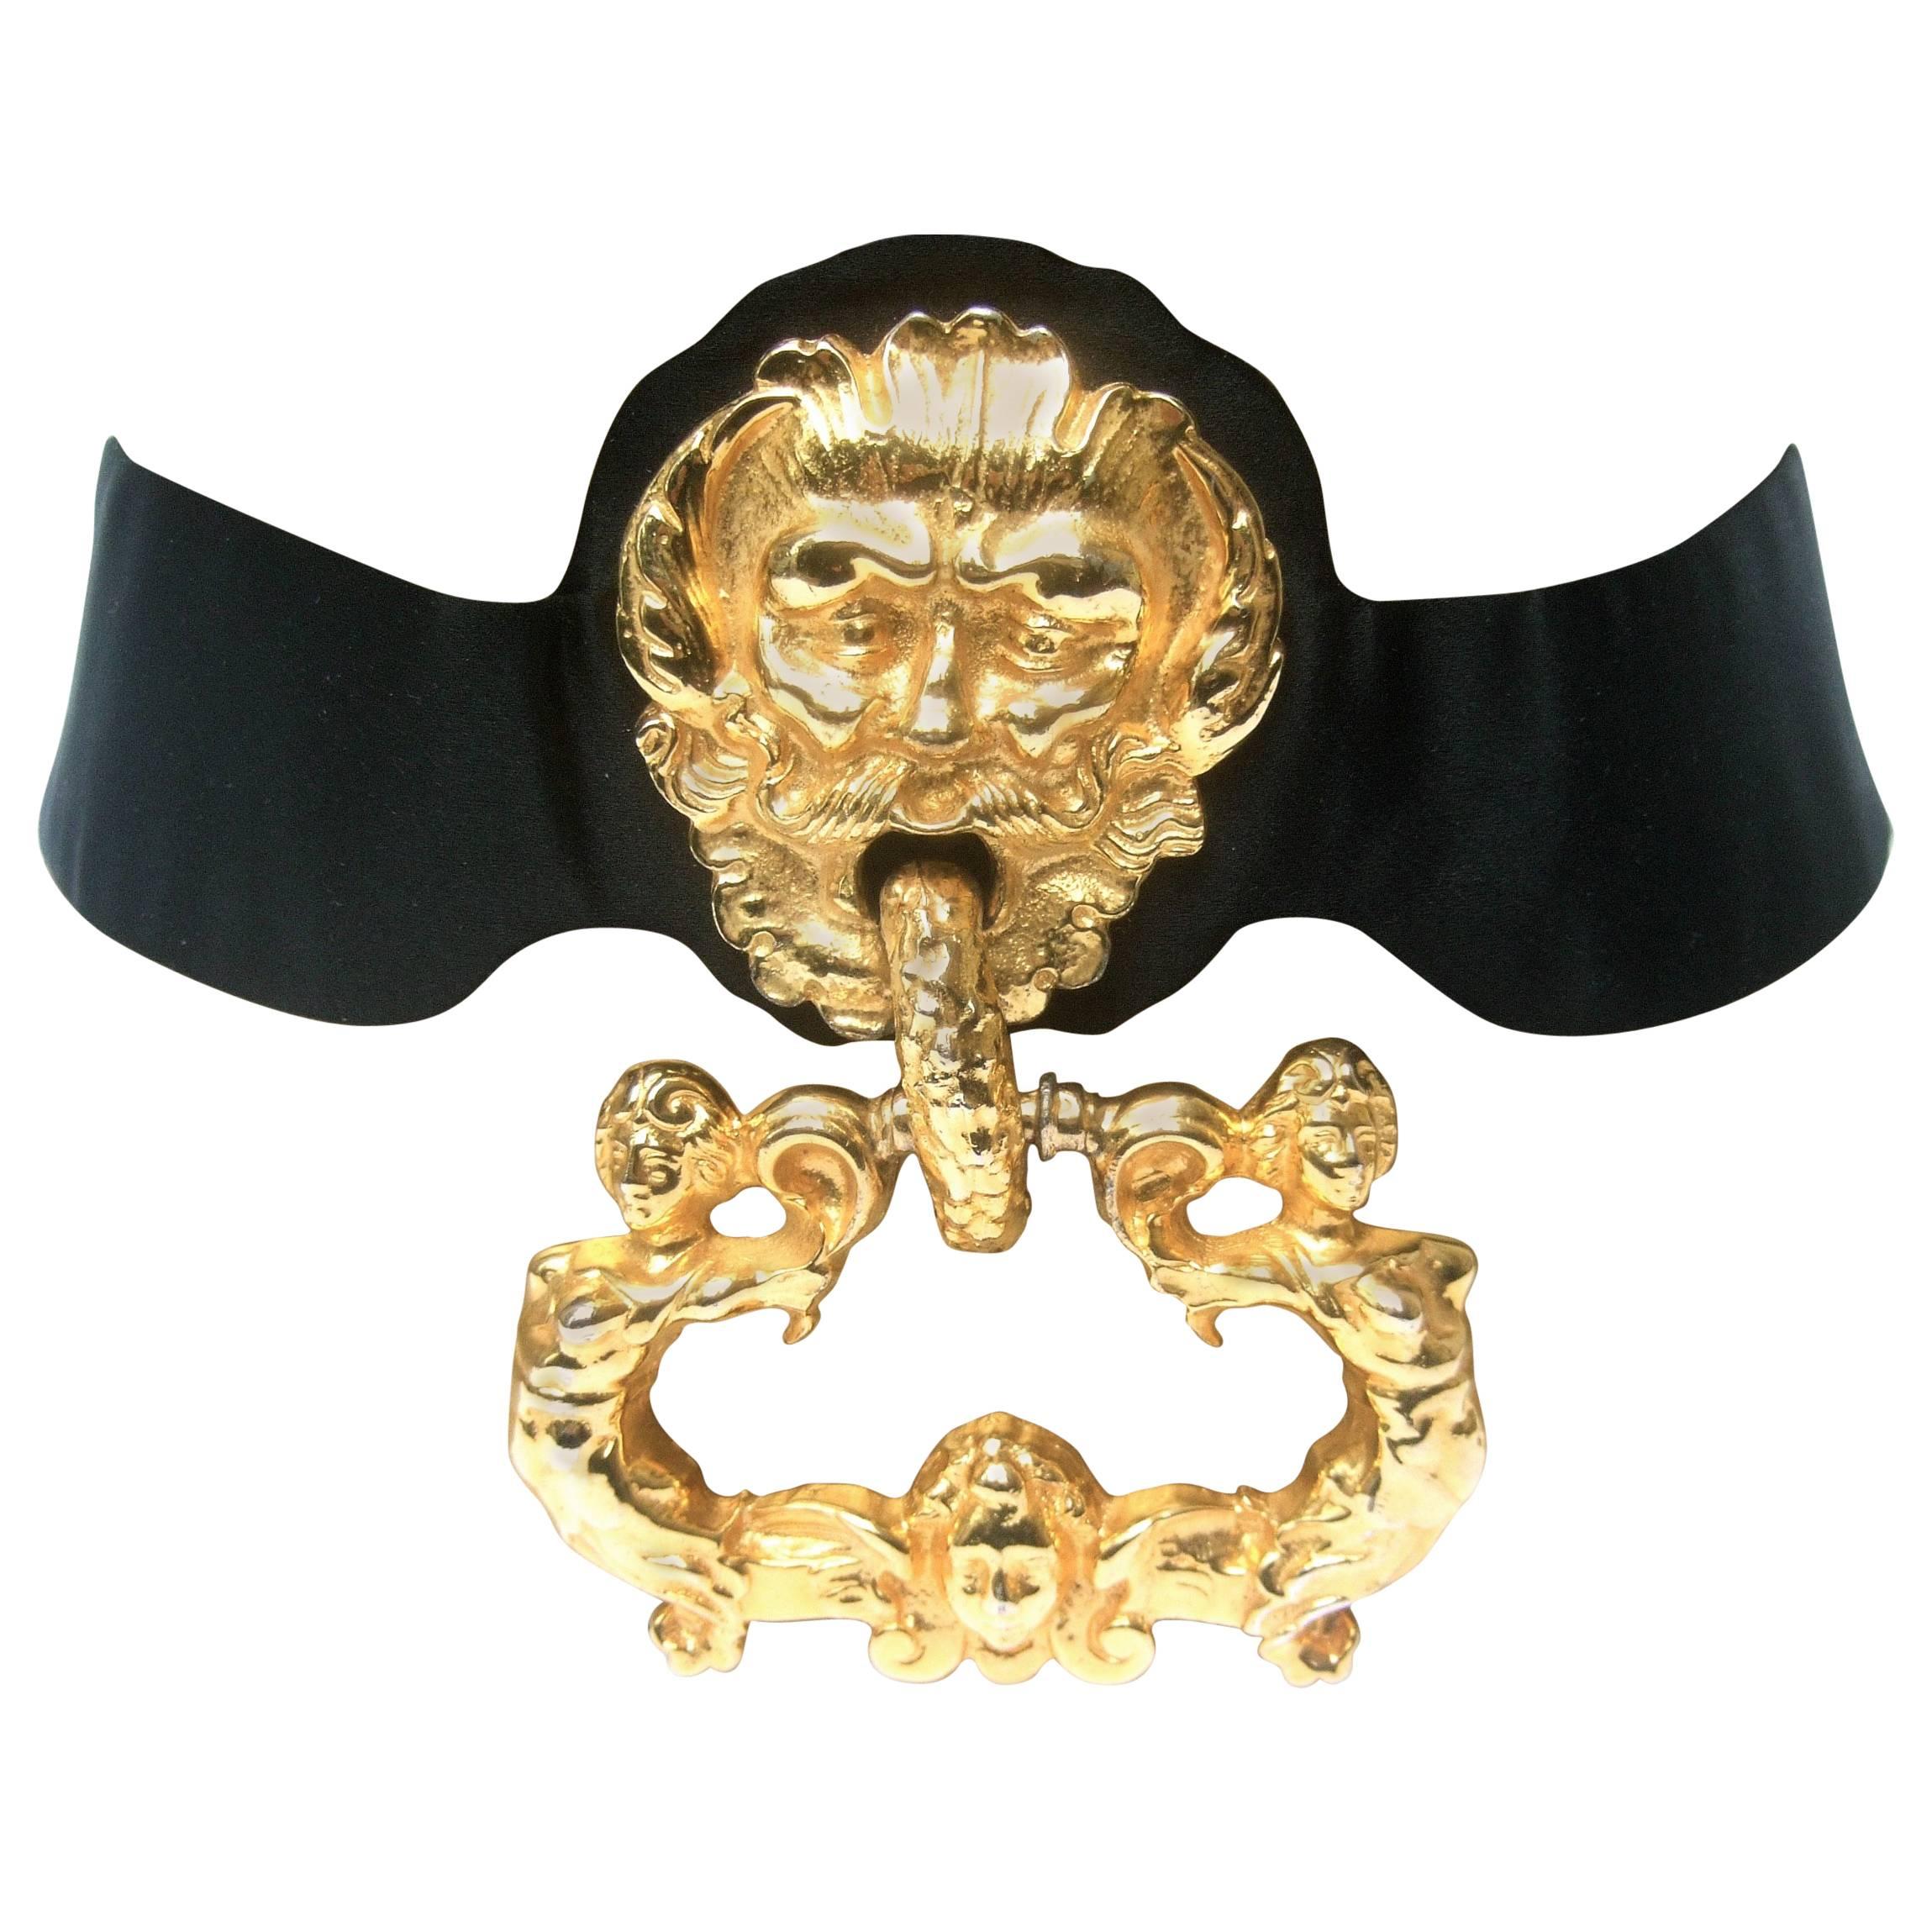 Judith Leiber Massive gilt metal door knocker satin belt c 1970s
The spectacular belt is adorned with a huge gilt metal
ornate mythical man; designed with a hinged emblem 
with a pair of ethereal woman on both sides & a cherub 
style figure at